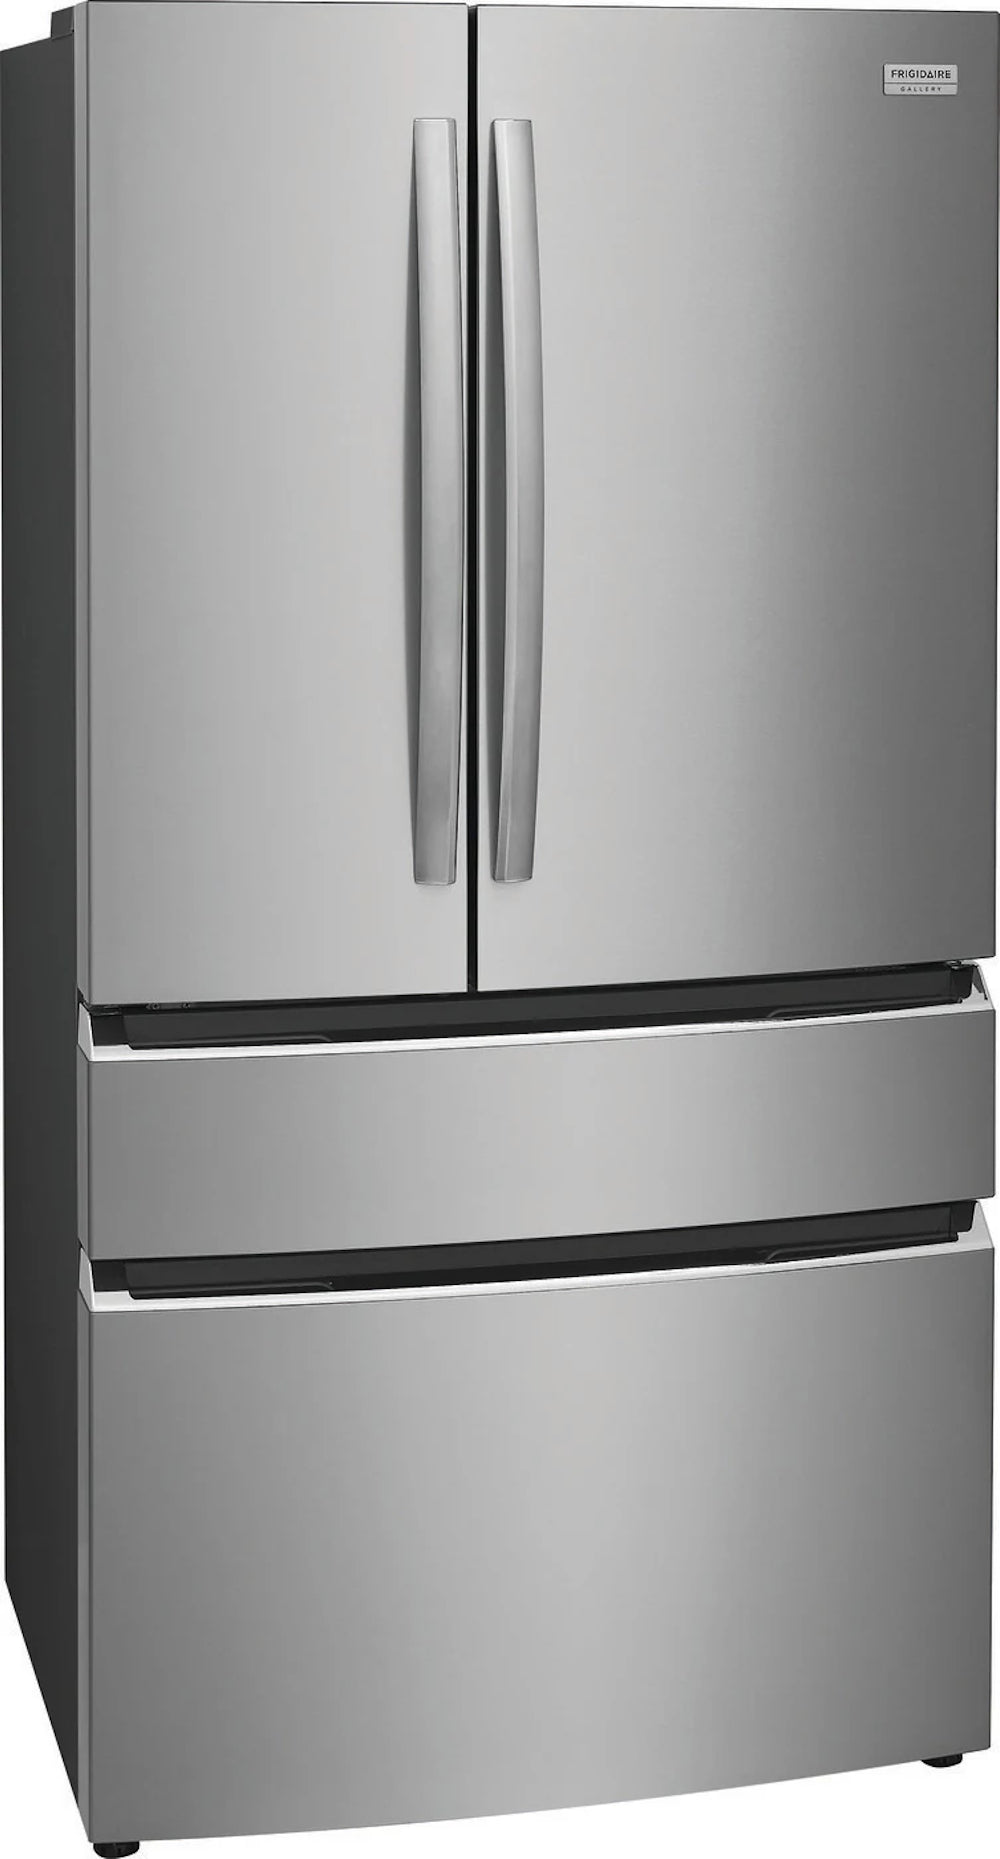 Frigidaire Gallery - 35.7 Inch 27.2 cu. ft Built In / Integrated Refrigerator in Stainless - GRMN2872AF